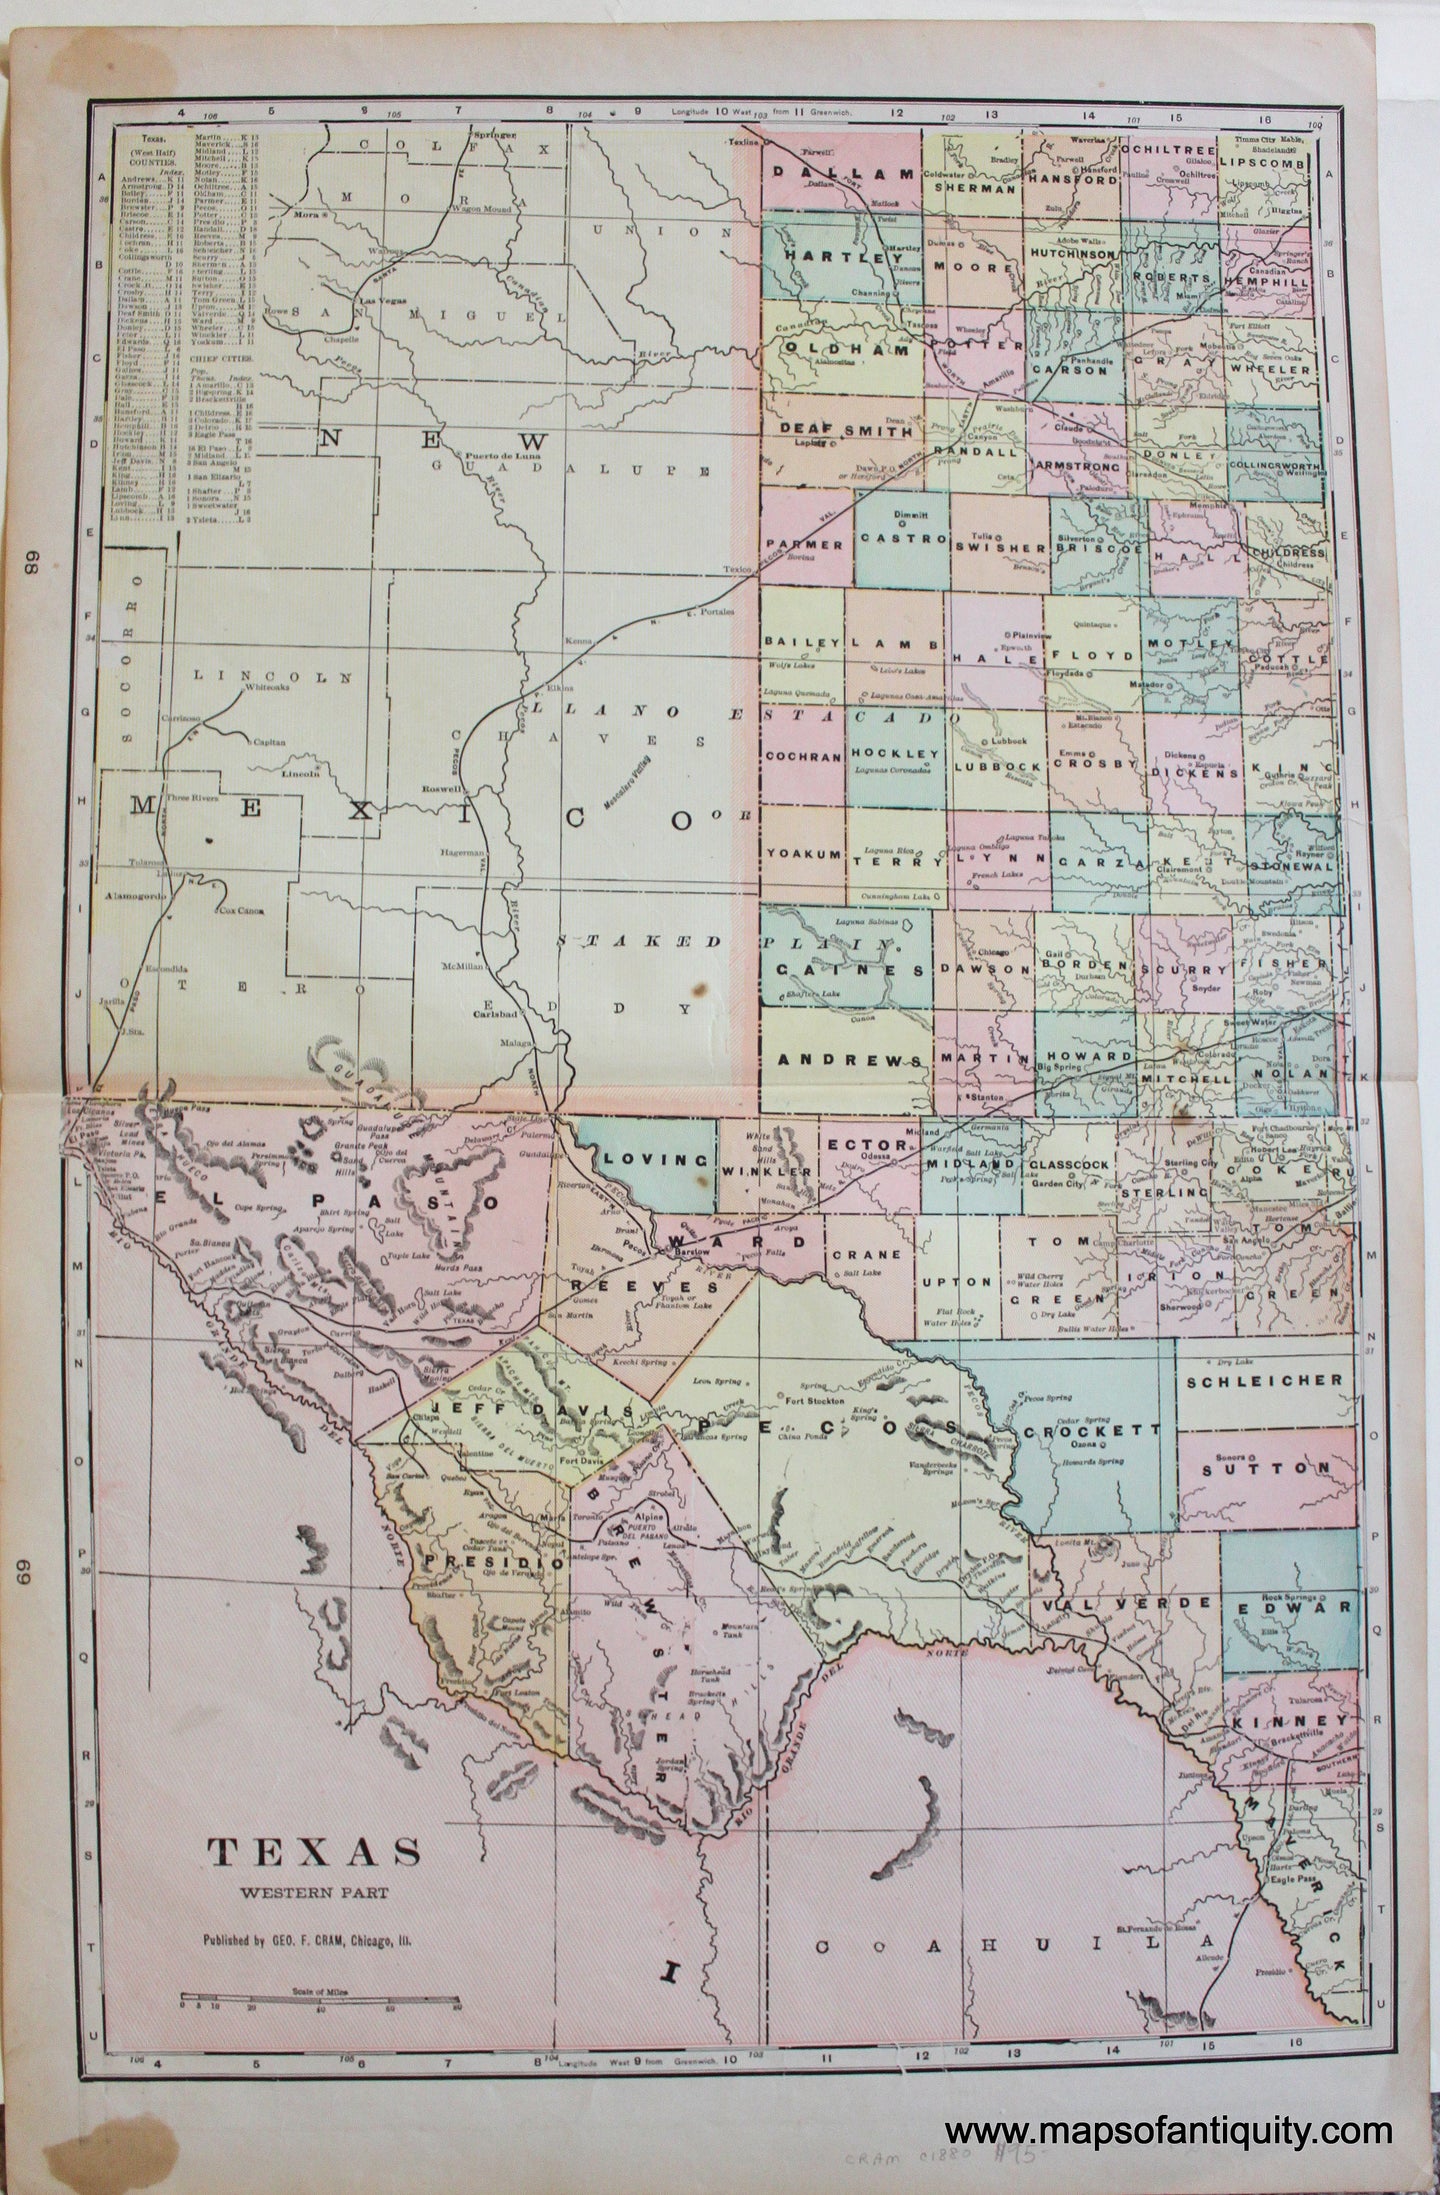 Antique-Printed-Color-Map-Texas-Western-Part-c.-1880-Cram-South-Texas-1800s-19th-century-Maps-of-Antiquity